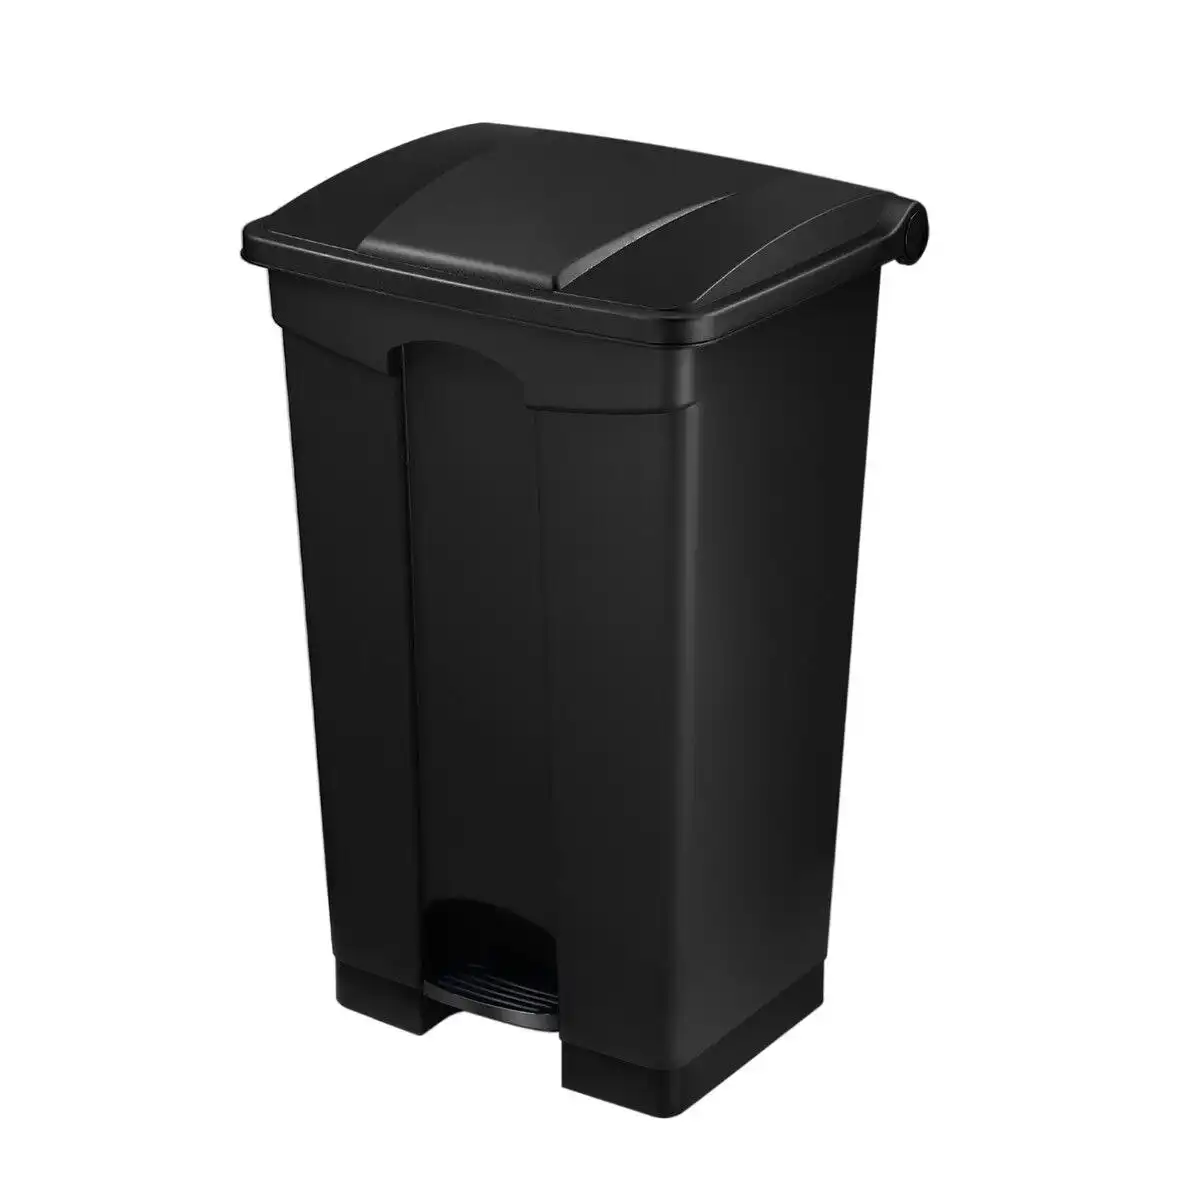 LUXSUITE 87L Rubbish Trash Bin Kitchen Dustbin Garbage Waste Recycling Compost Can Pedal Black Large Plastic for Garden Home Office